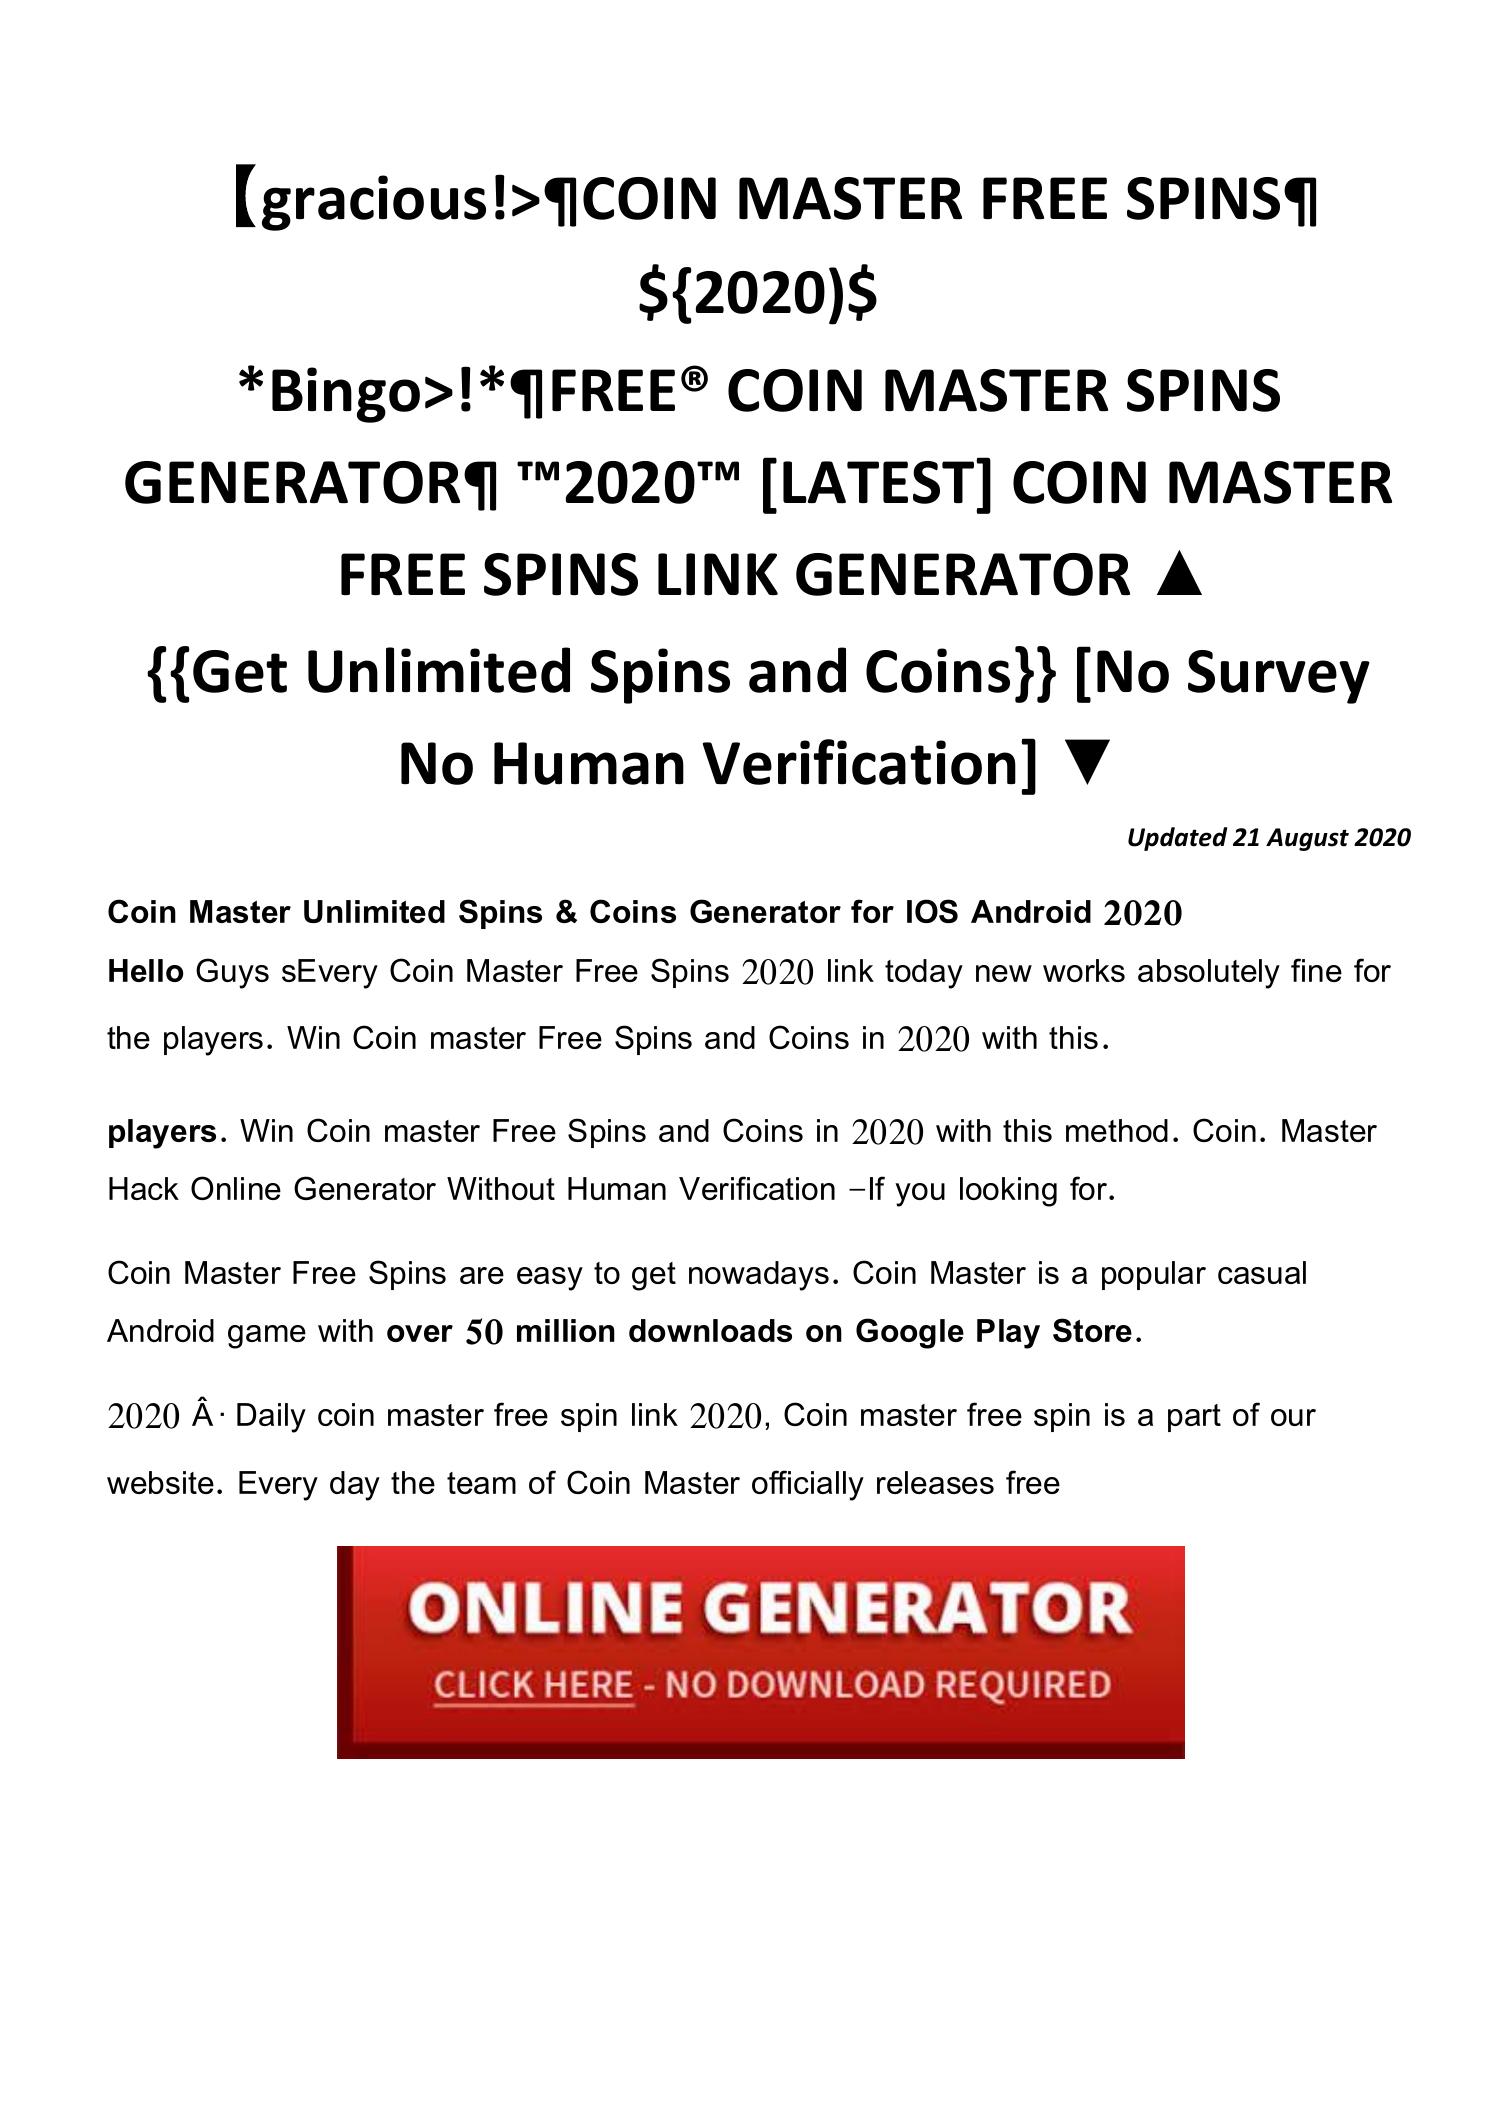 How to get 50 free spins on coin master